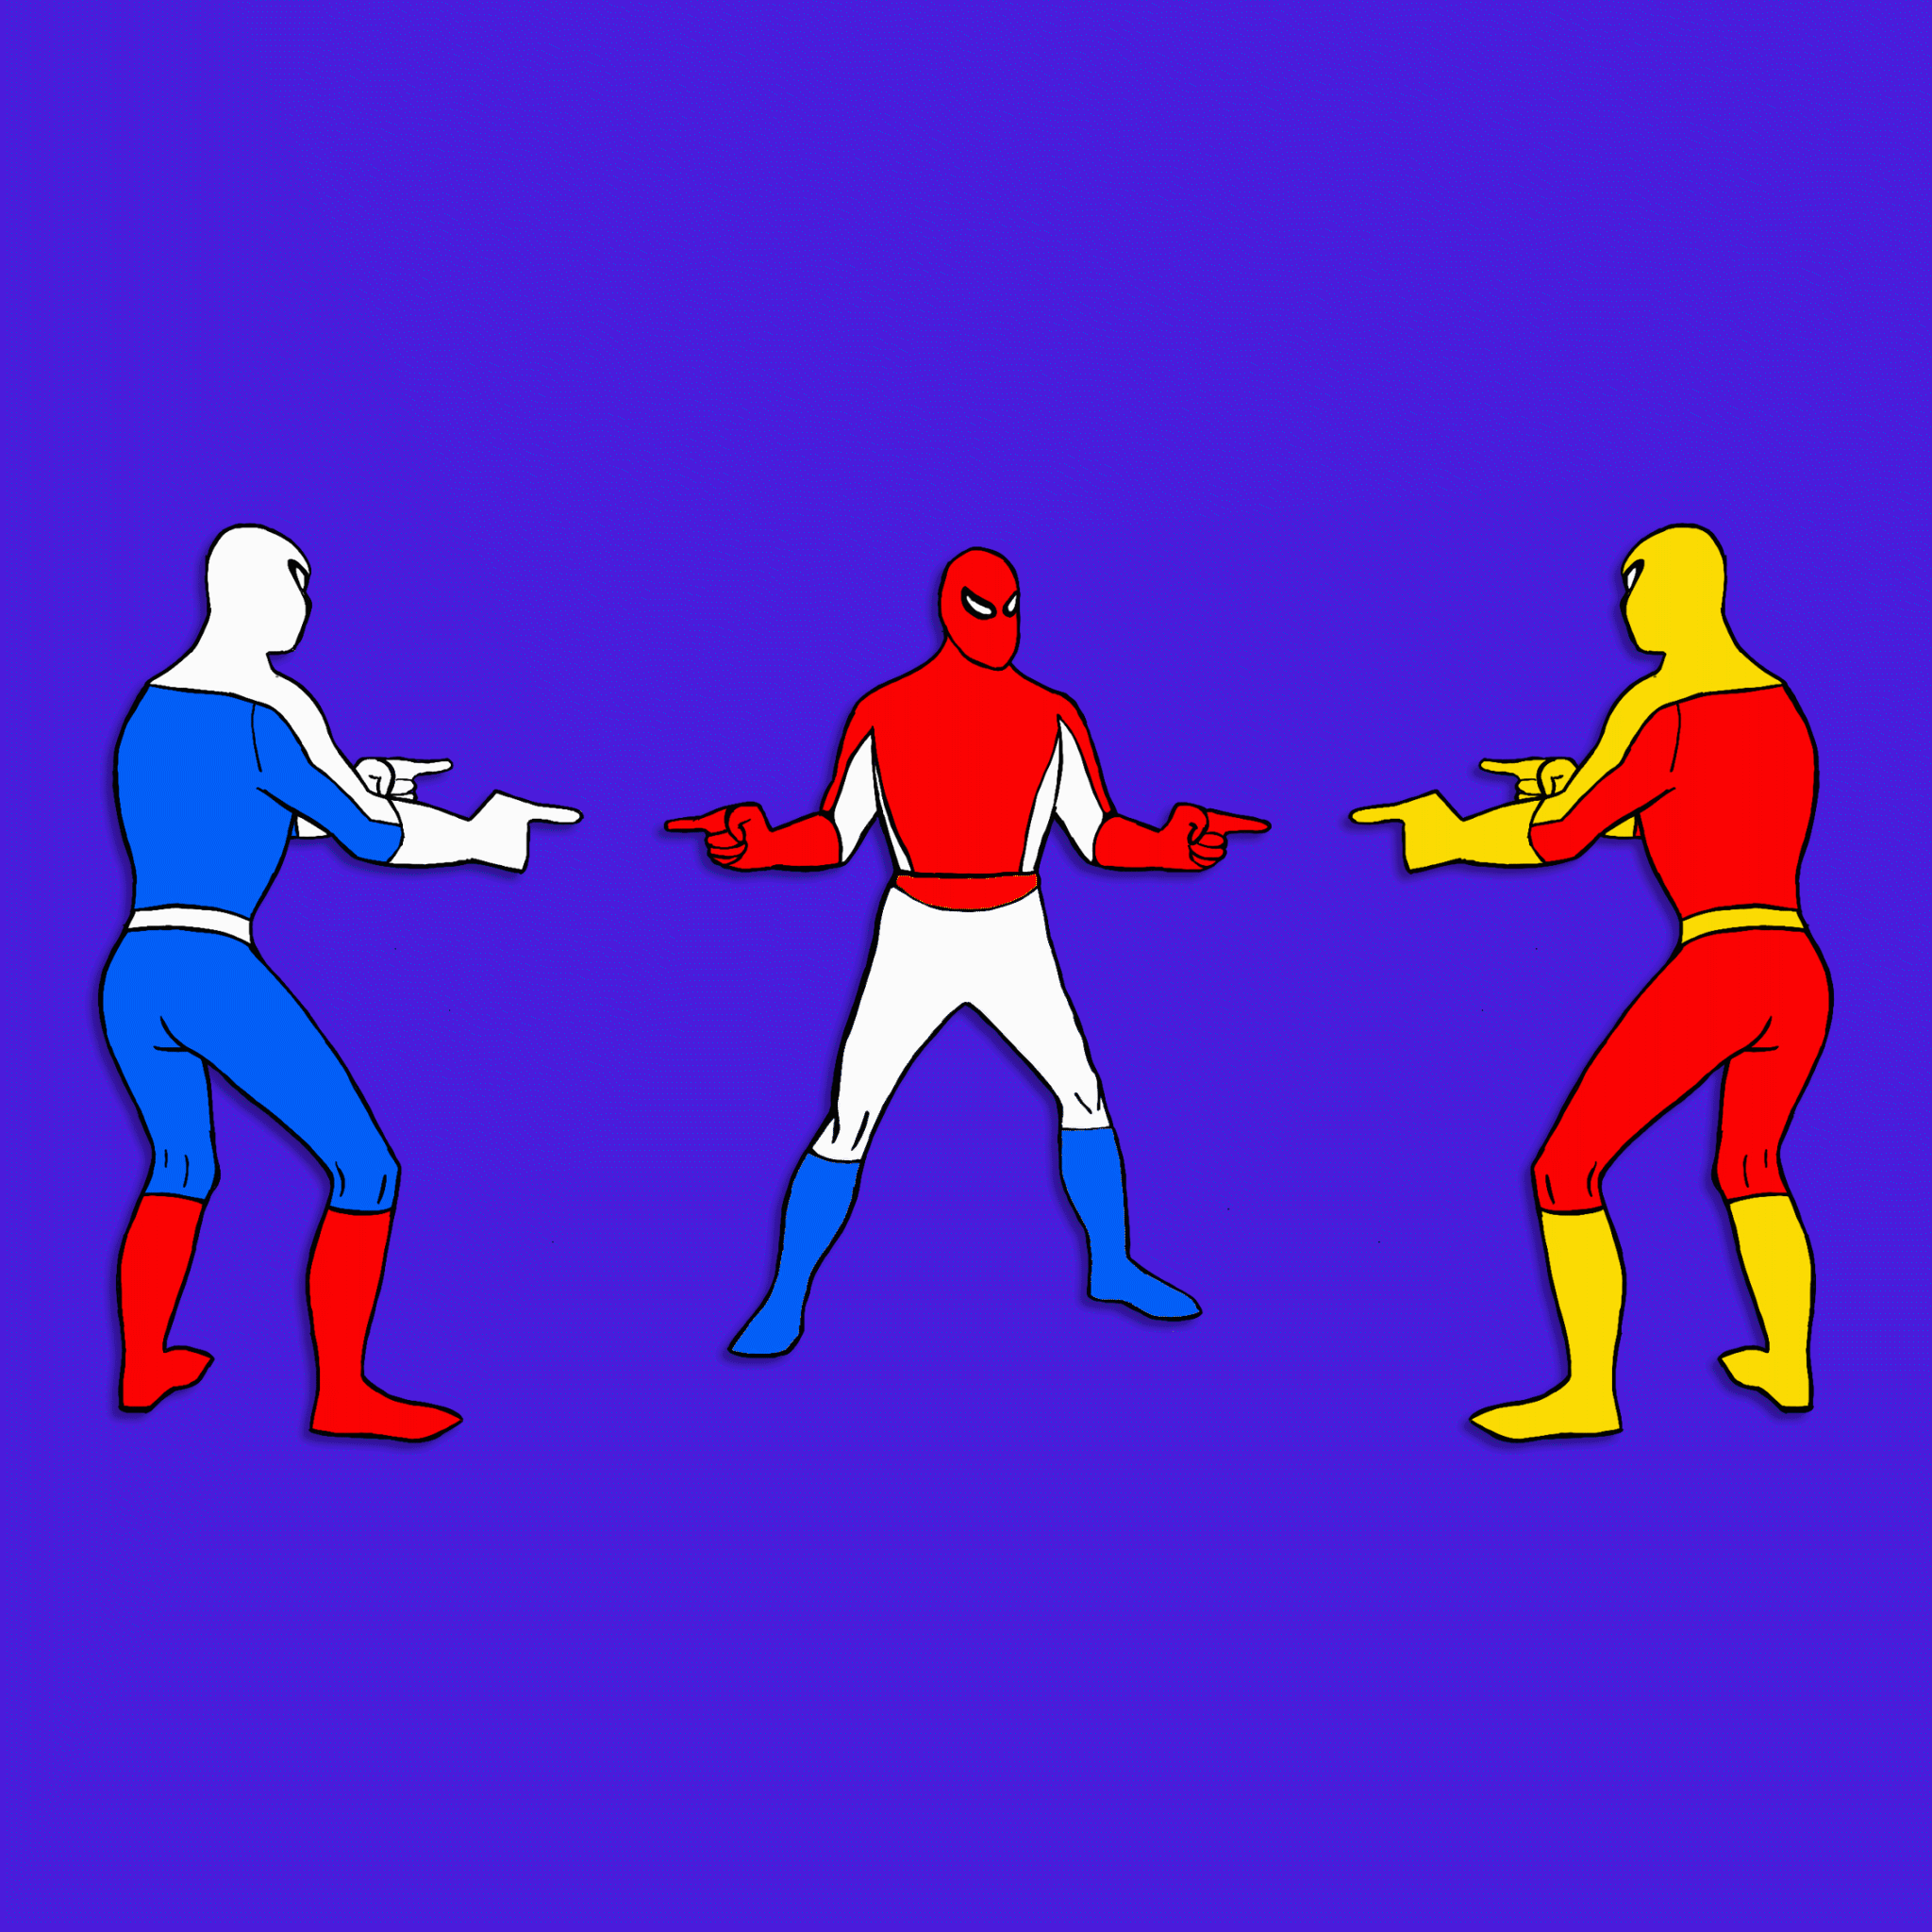 An illustration based on the Spider-Man Pointing at Spider-Man meme where there are three Spider-Man’s pointing fingers at each other. One whose outfit is red, white and blue, another's outfit is white, blue and red and the third’s outfit is red and yellow.